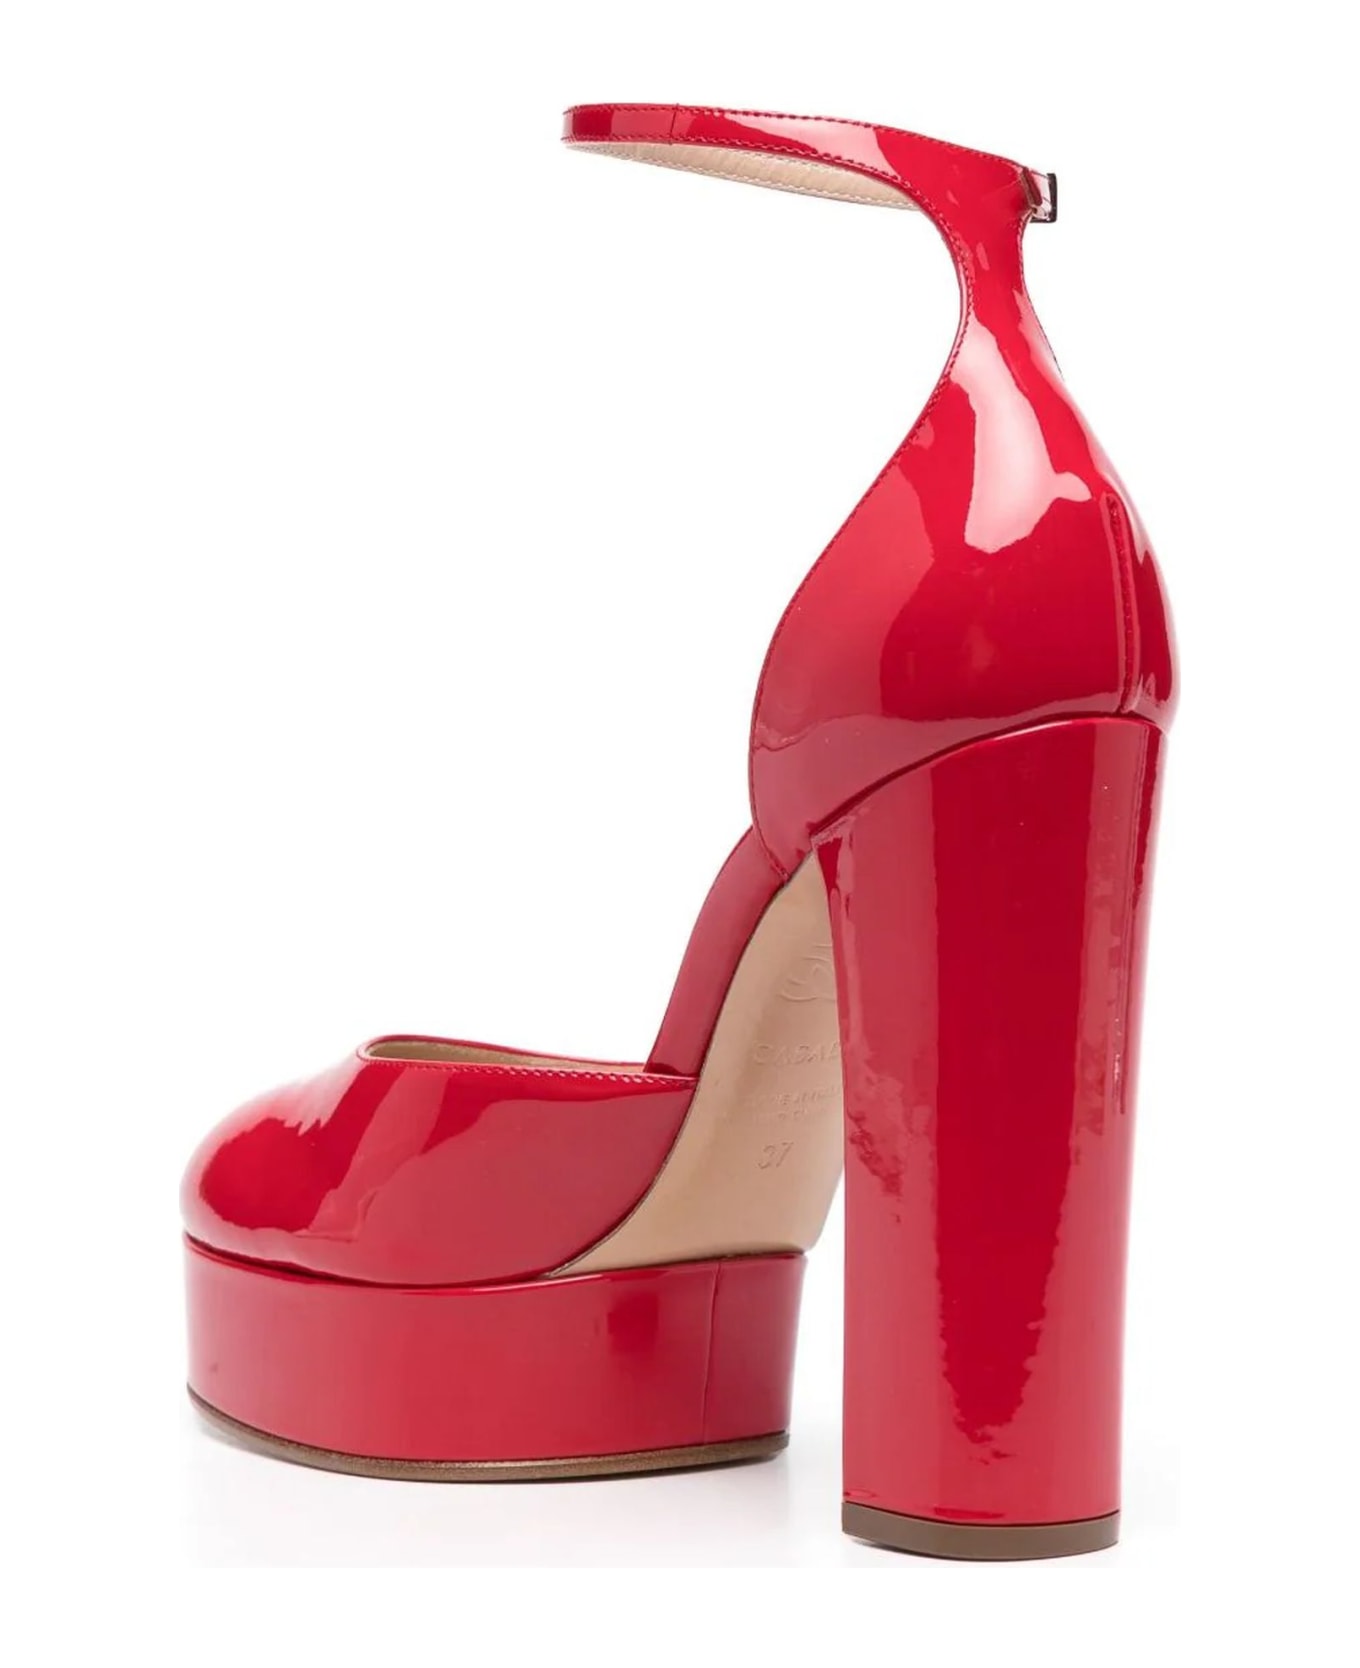 Casadei Red Calf Leather Platform Pumps - Red ハイヒール